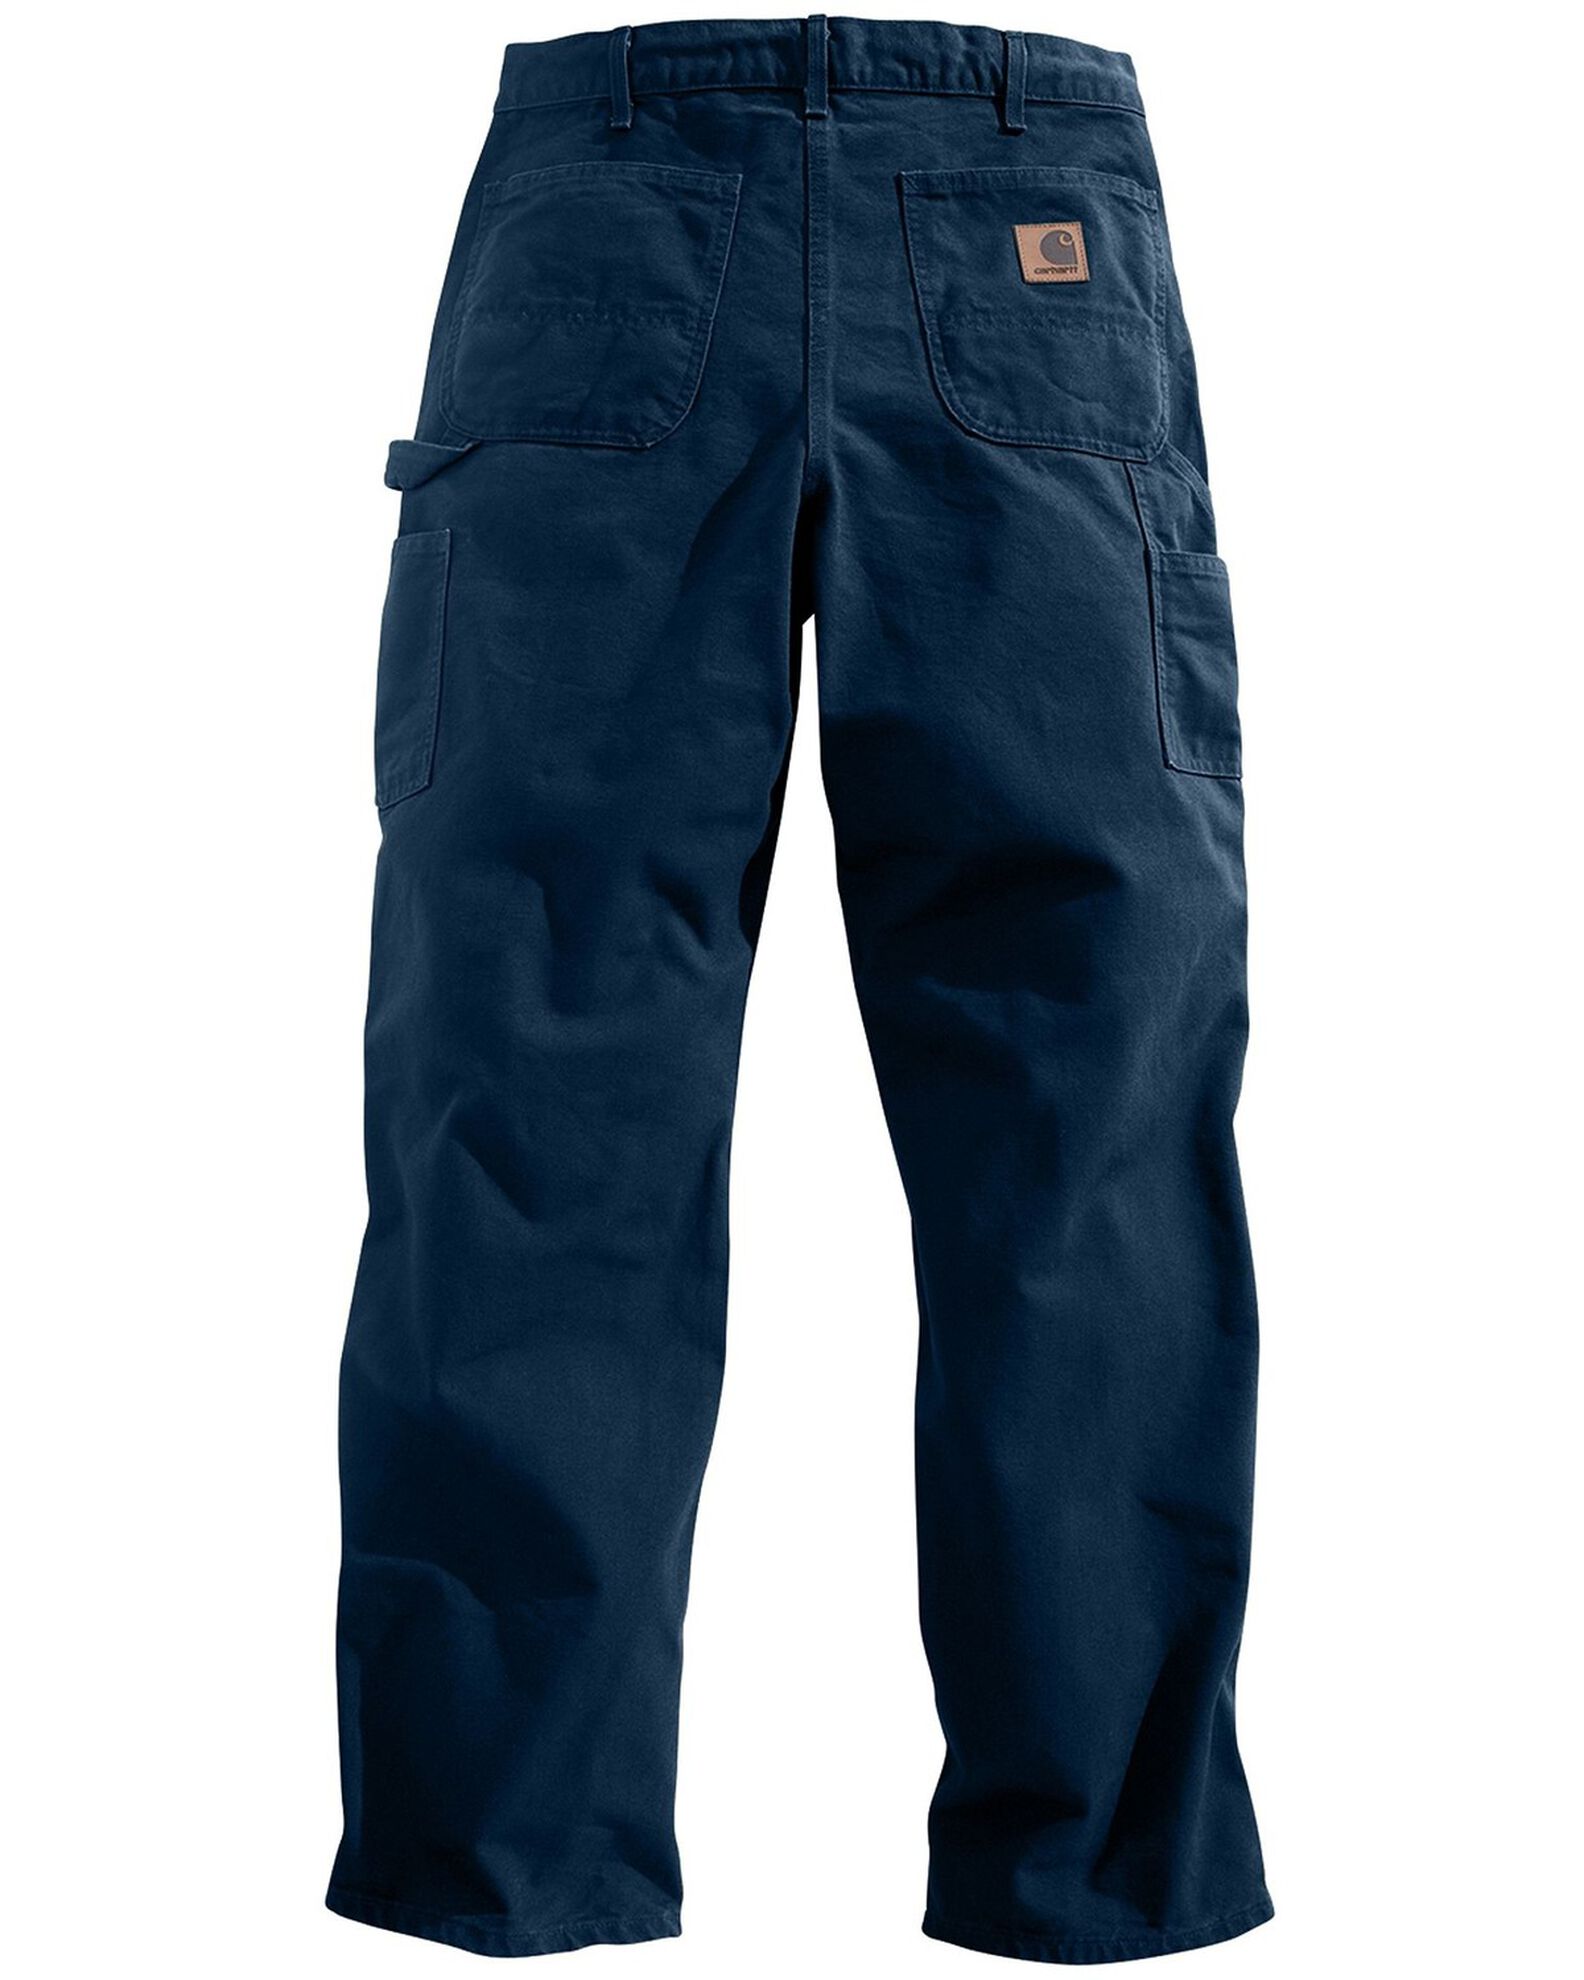 Carhartt - Men's Washed-Duck Loose Fit Work Dungaree (Midnight